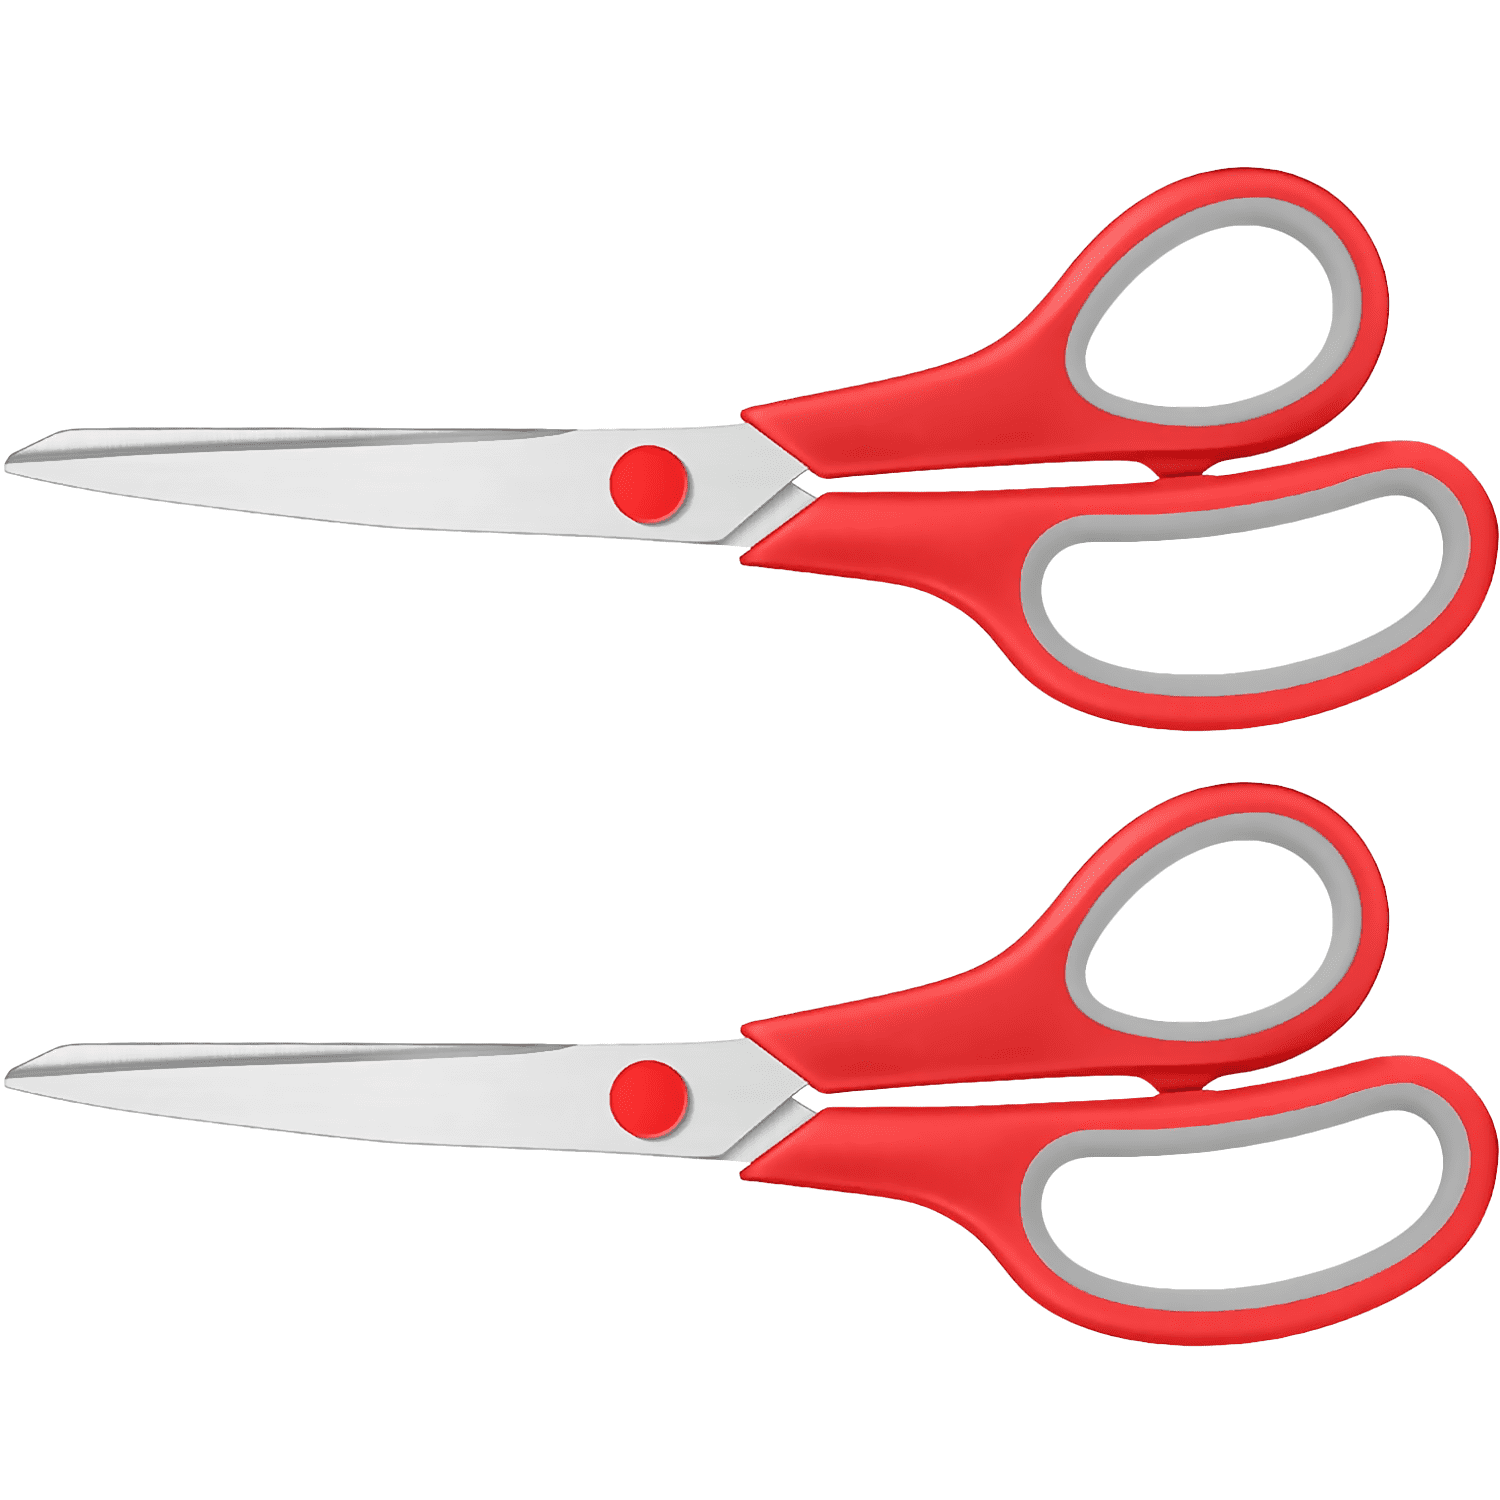 School Scissors, L: 14 cm, Both Left and Right, black, red, 12 pc/ 1 pack